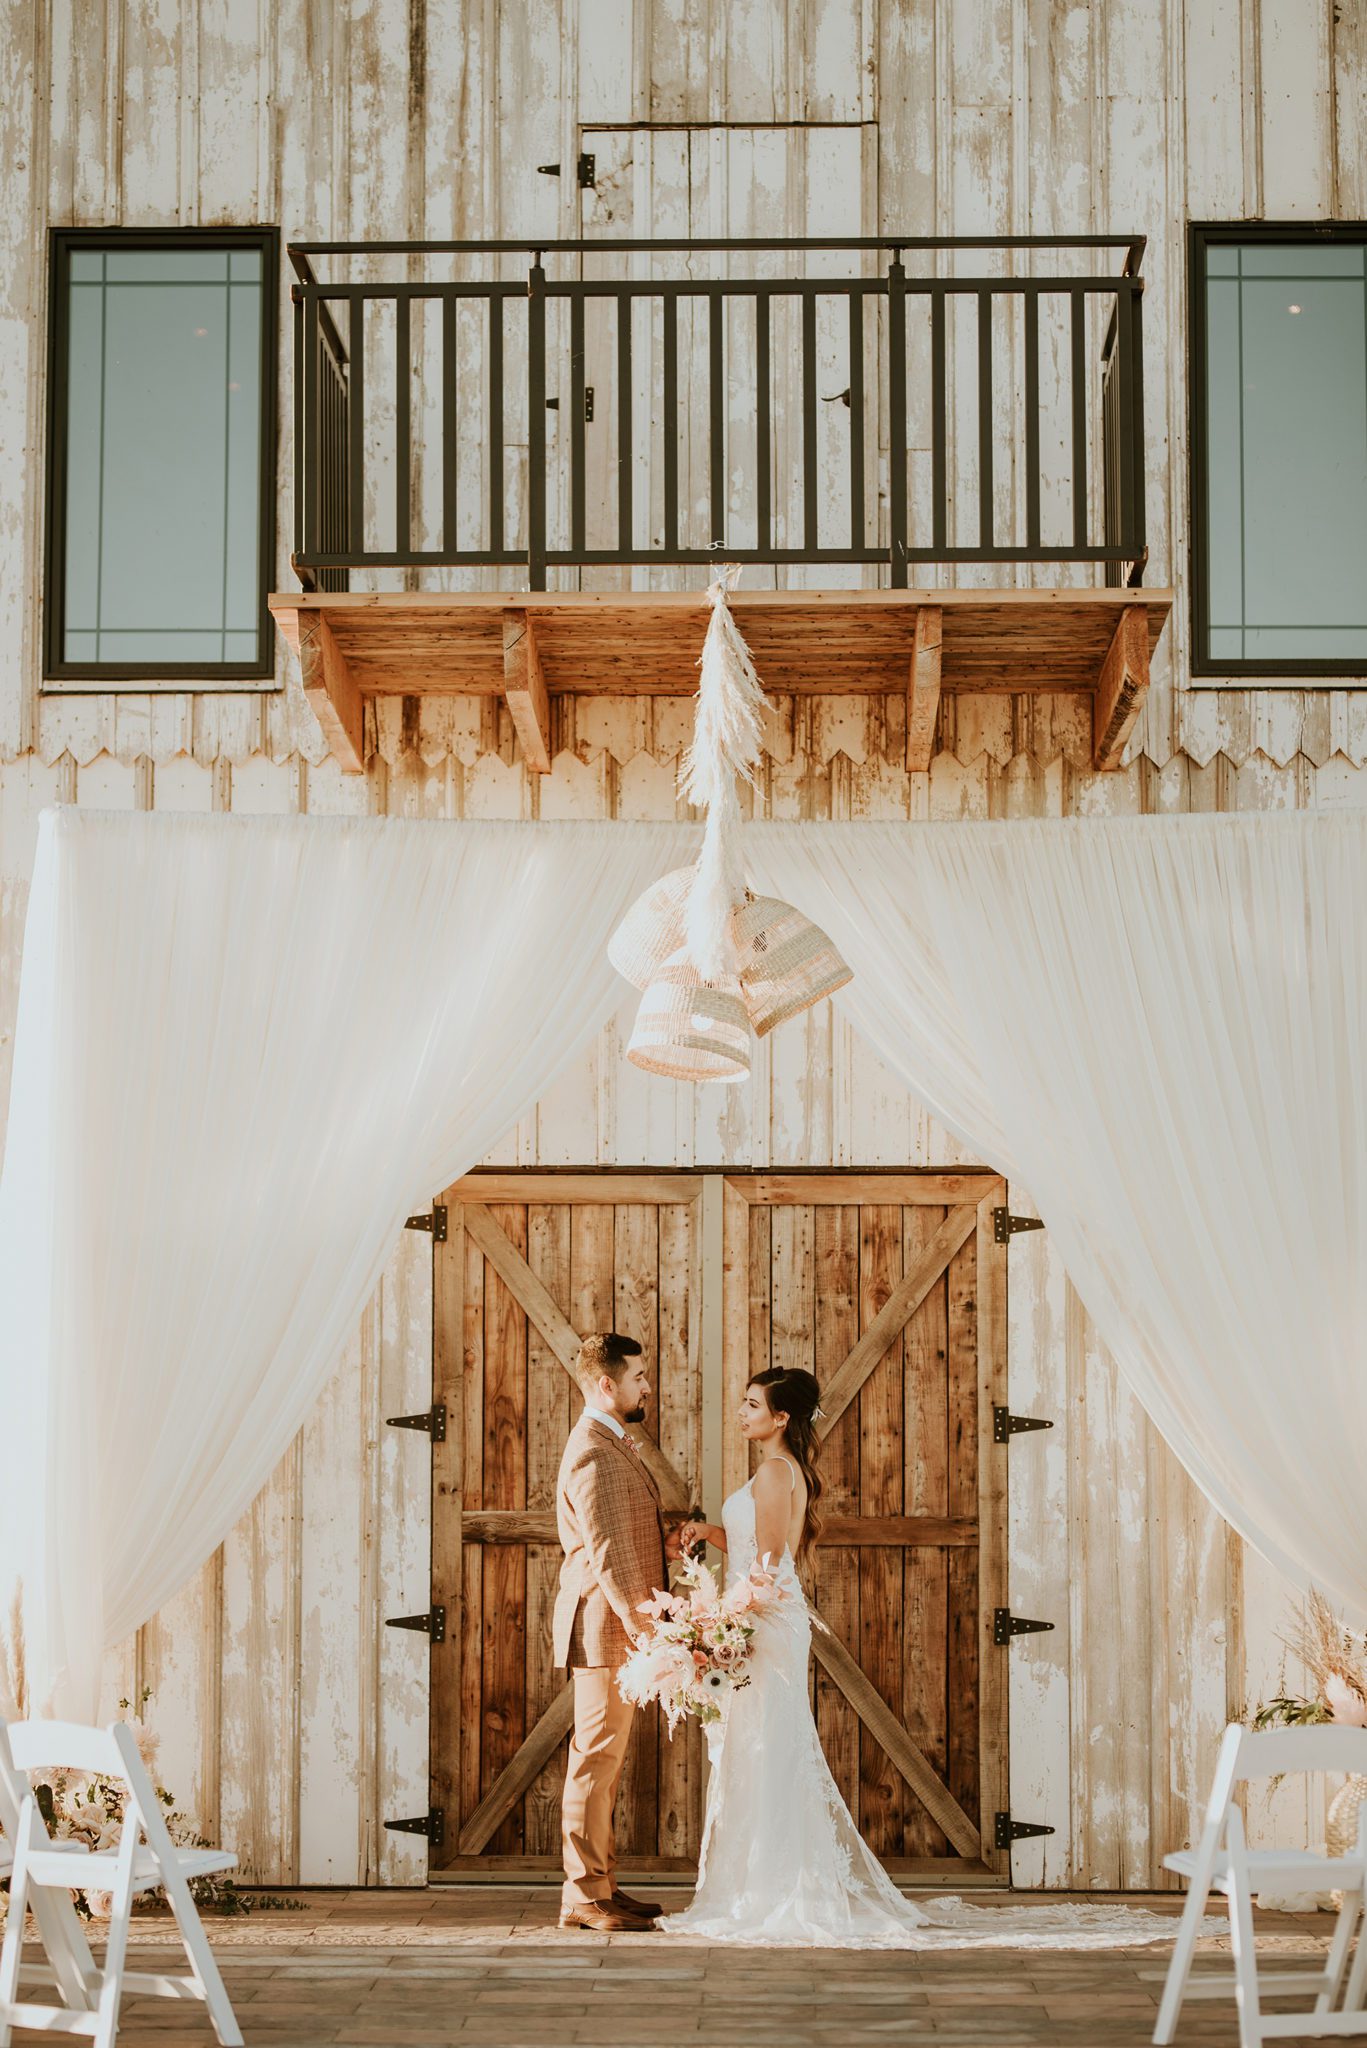 Western and bohemian wedding inspiration at the Countryside Barn in  Lethbridge Alberta